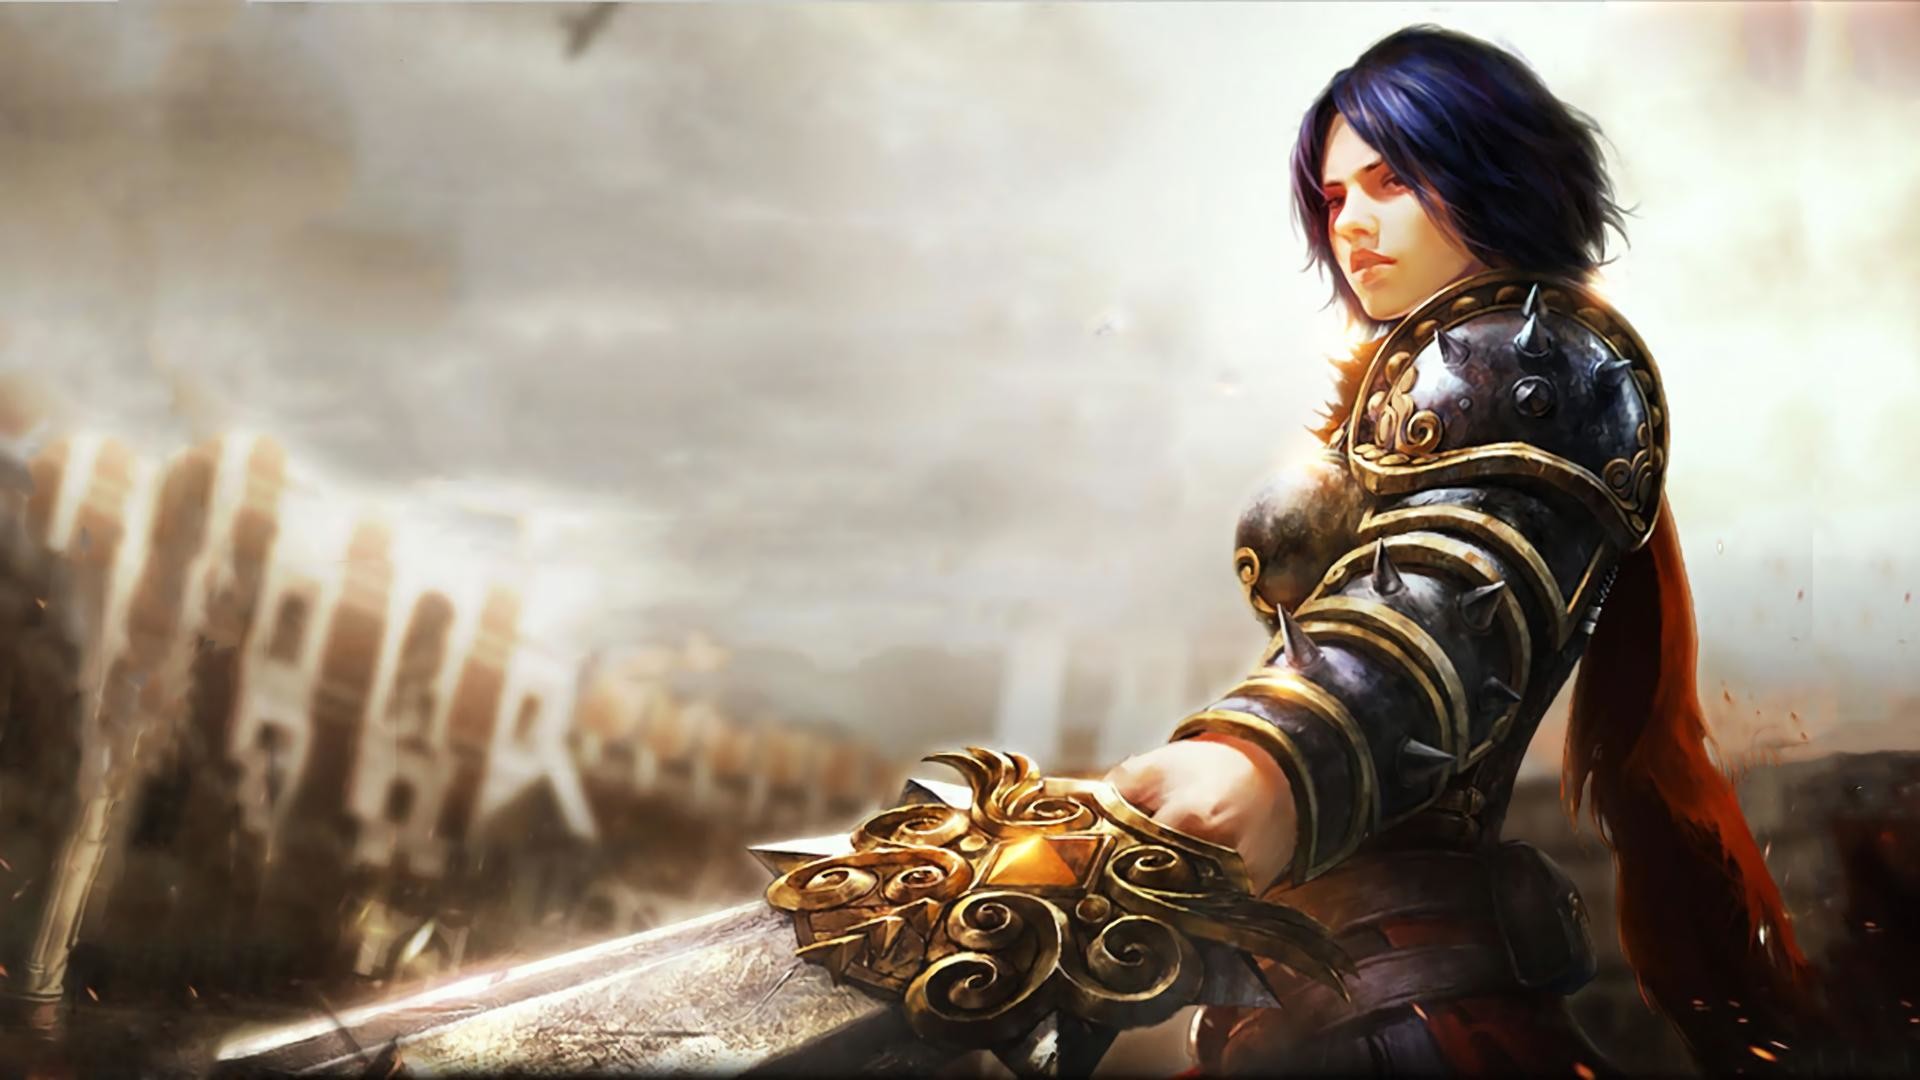 MEDIAI made a Bellona wallpaper from one of the Chinese adds for smite and  thought some people might like it.